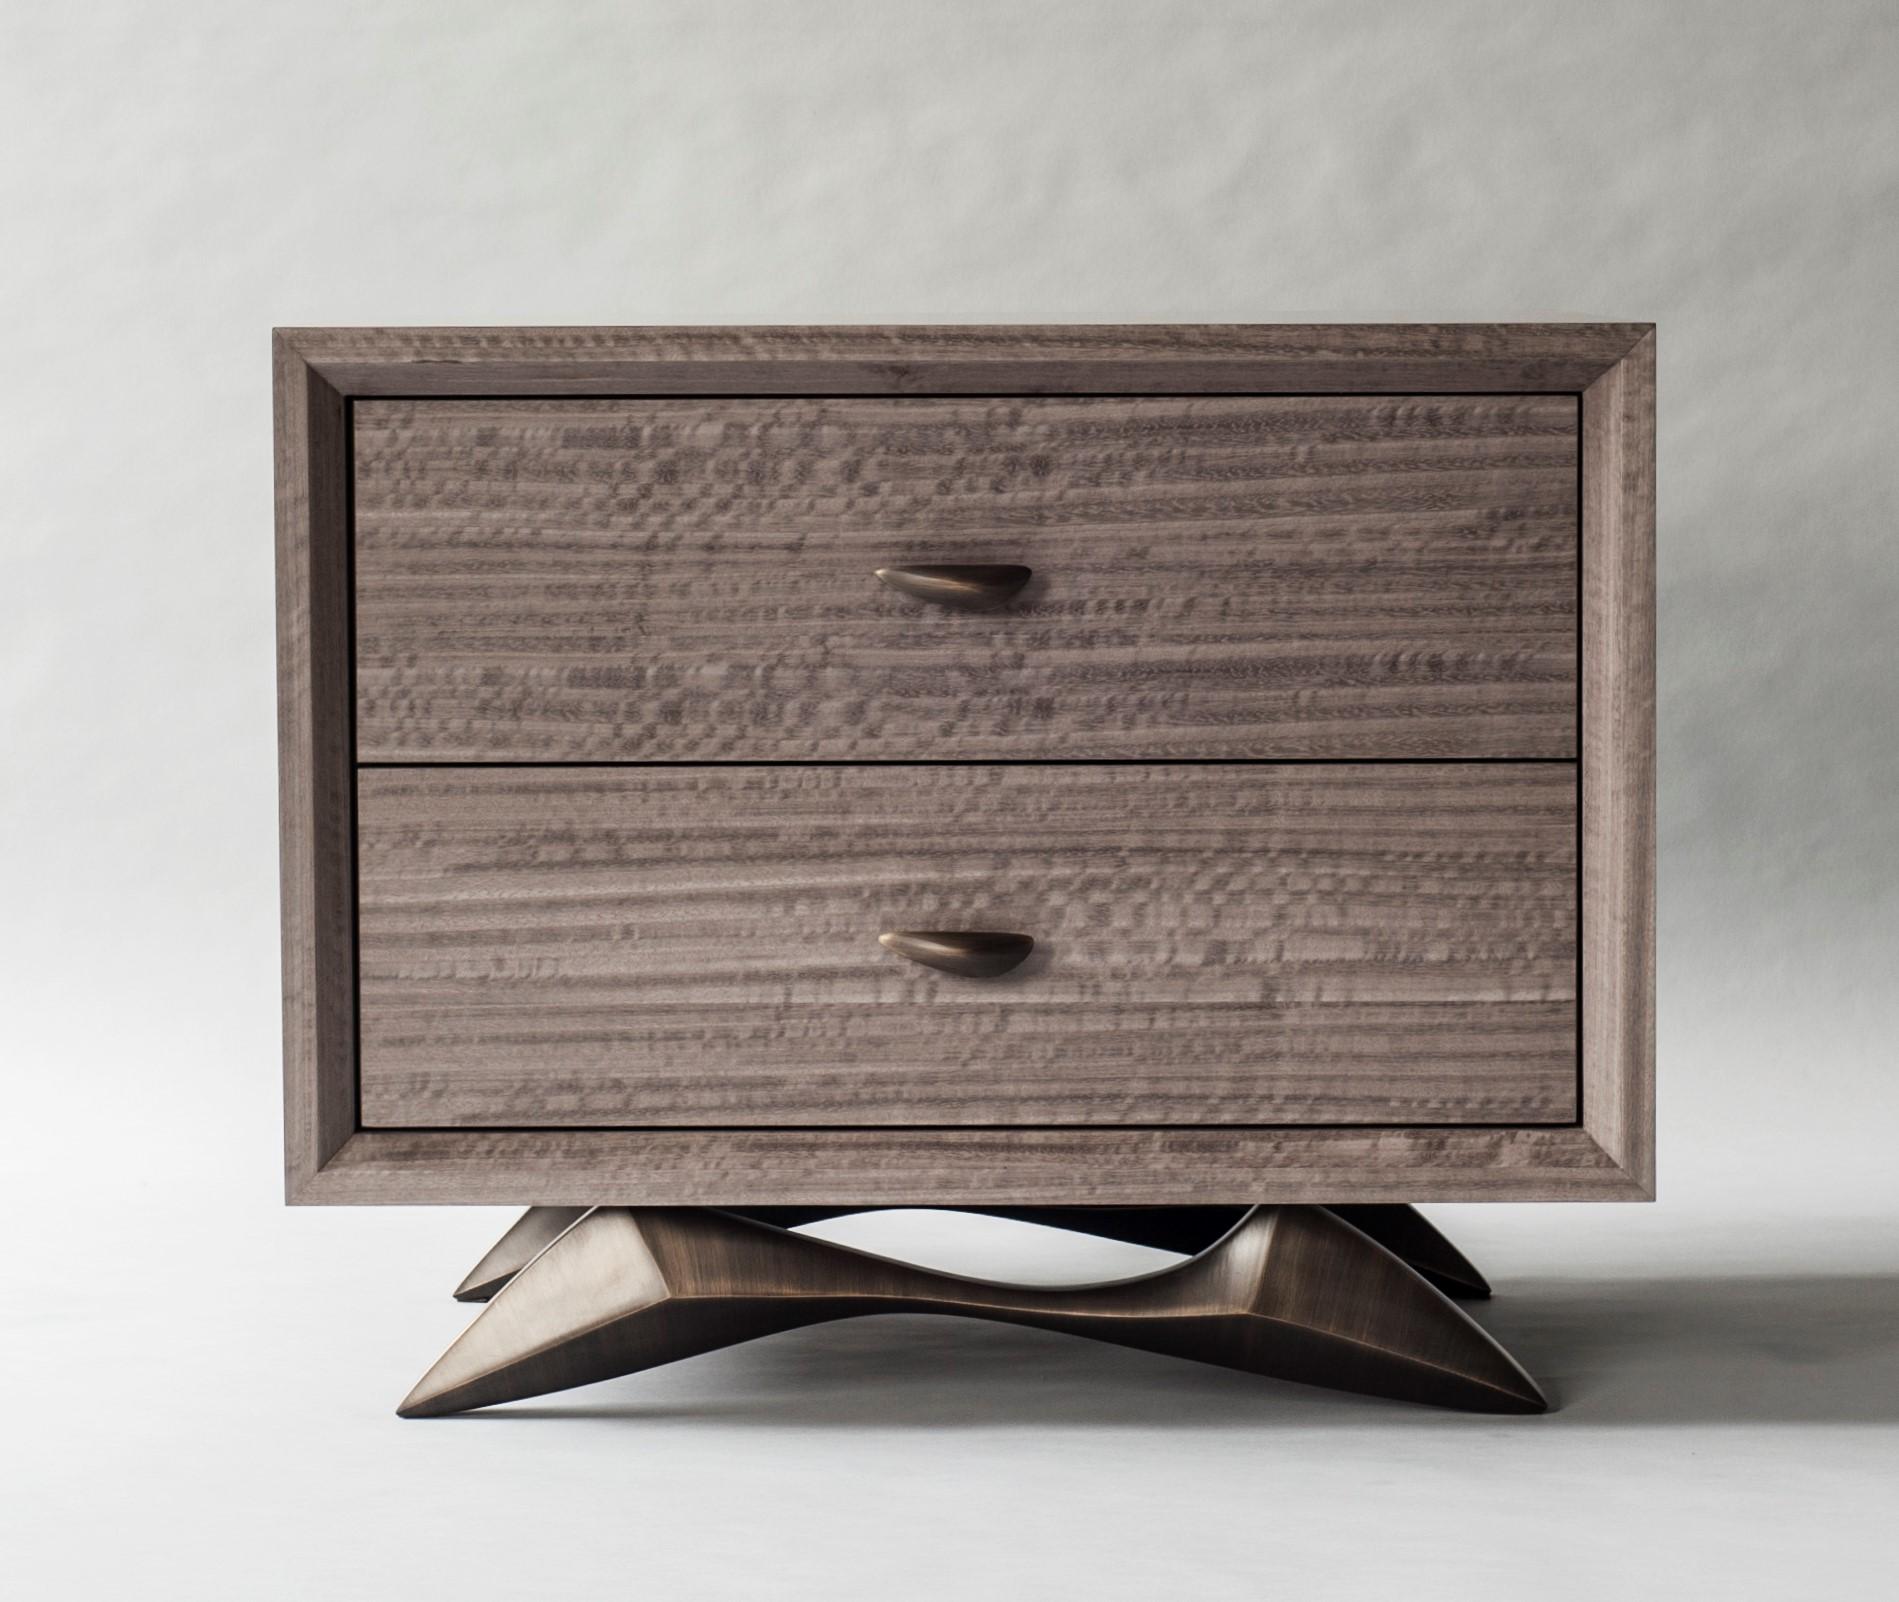 Designed as an exploration of equilibrium, the sculptural base of the Bevel Bedside Table appears to float on it's many facets. Appearing at once delicate and sturdy, the carefully balanced base supports dual drawers above.